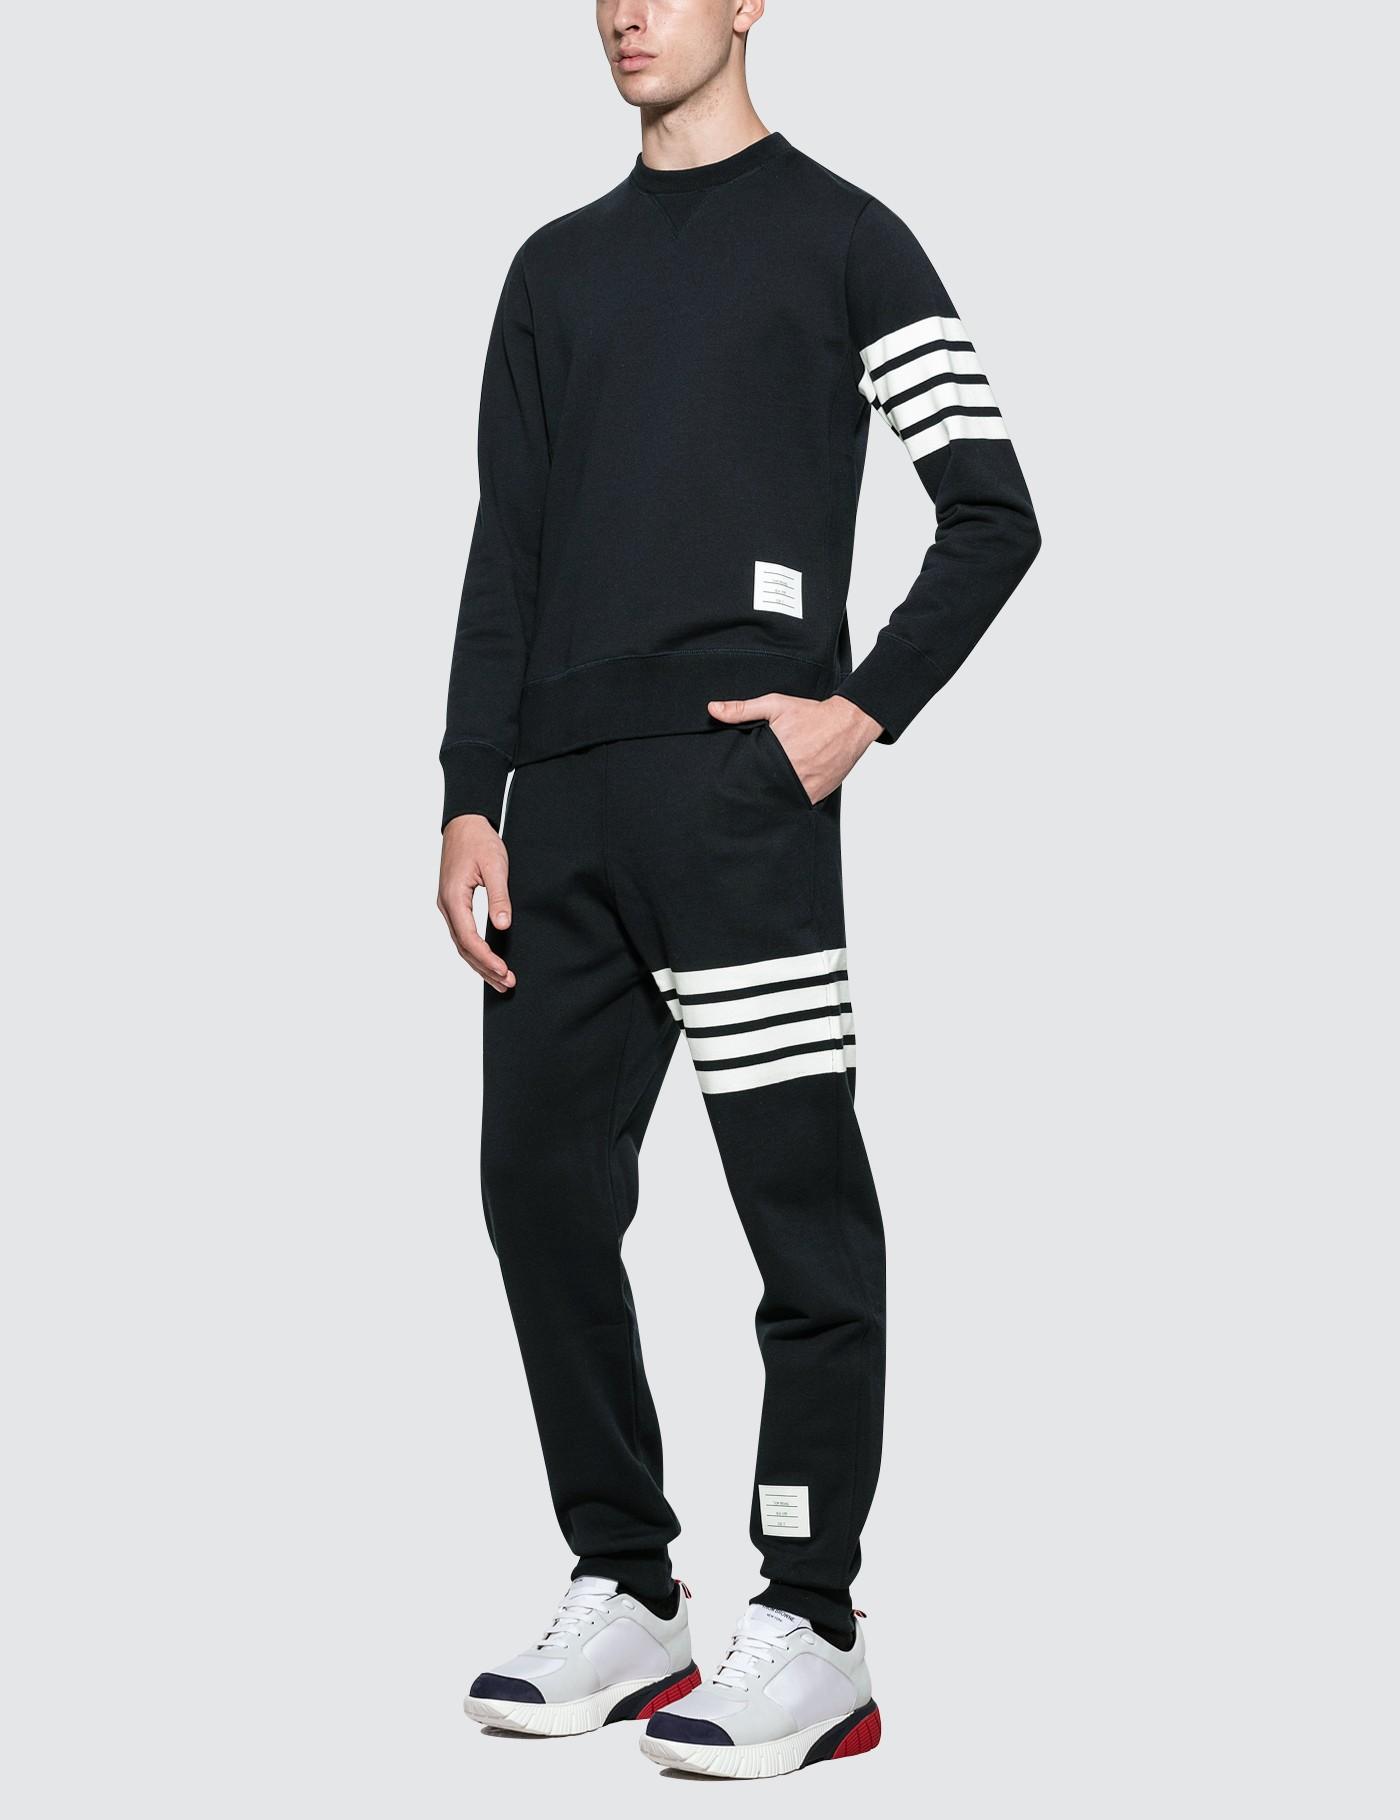 Thom Browne Cotton Classic Sweatshirt in Blue for Men - Lyst